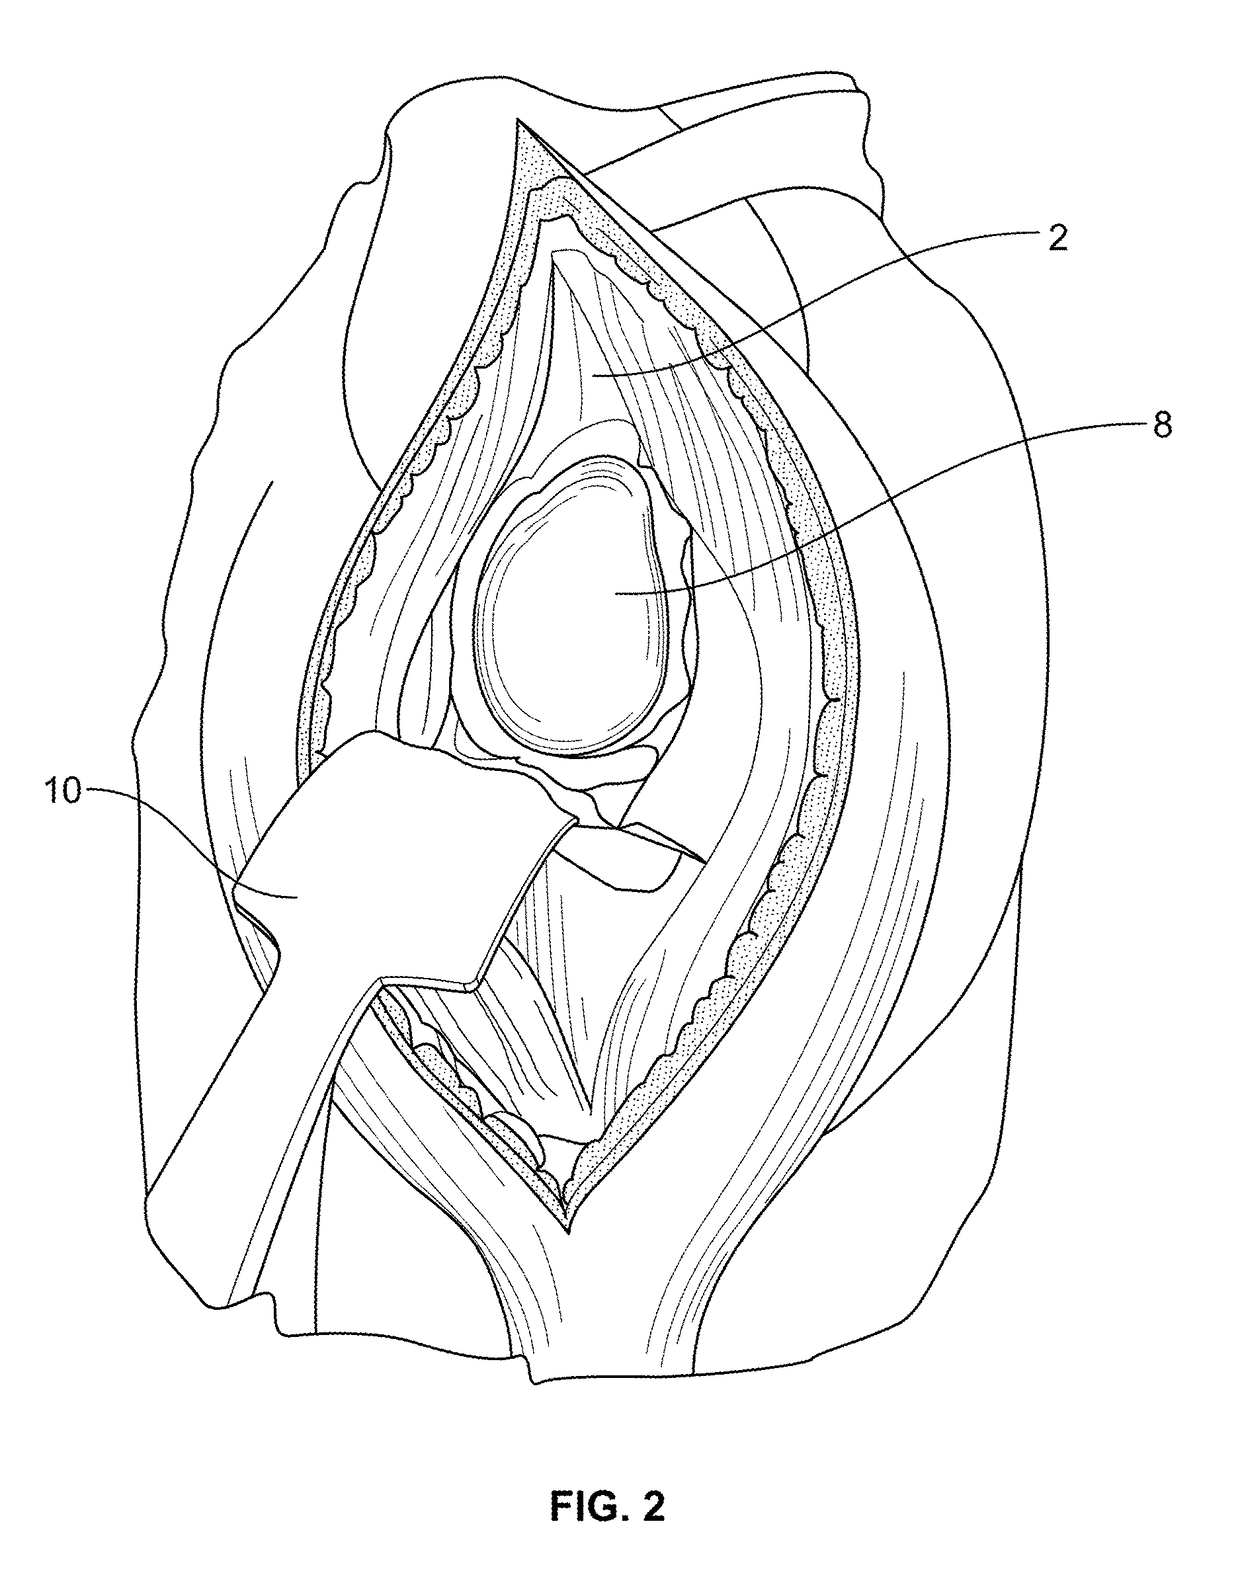 Shape-fit glenoid reaming systems and methods